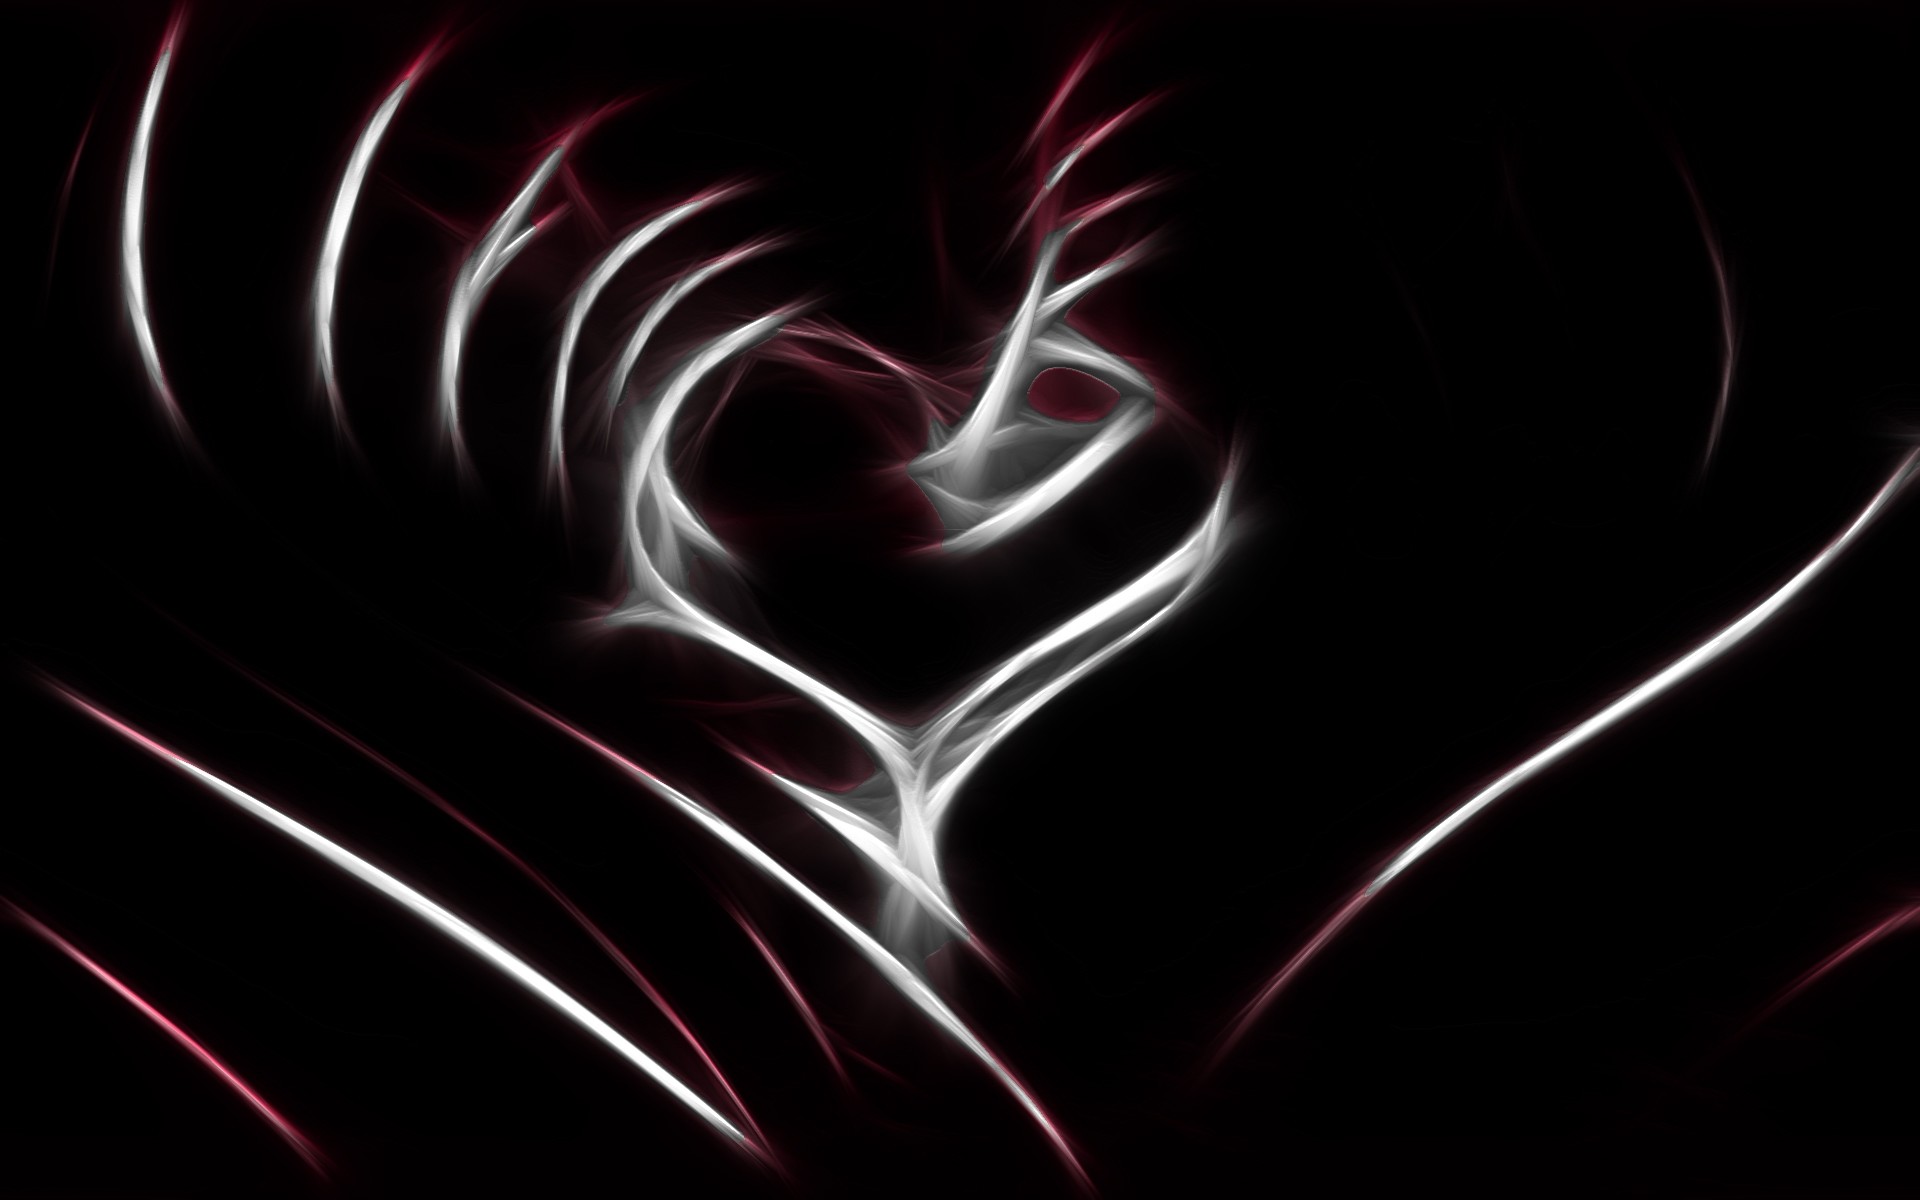 1920x1200 Wallpaper Abstract, Heart, Line, White, Red, Black